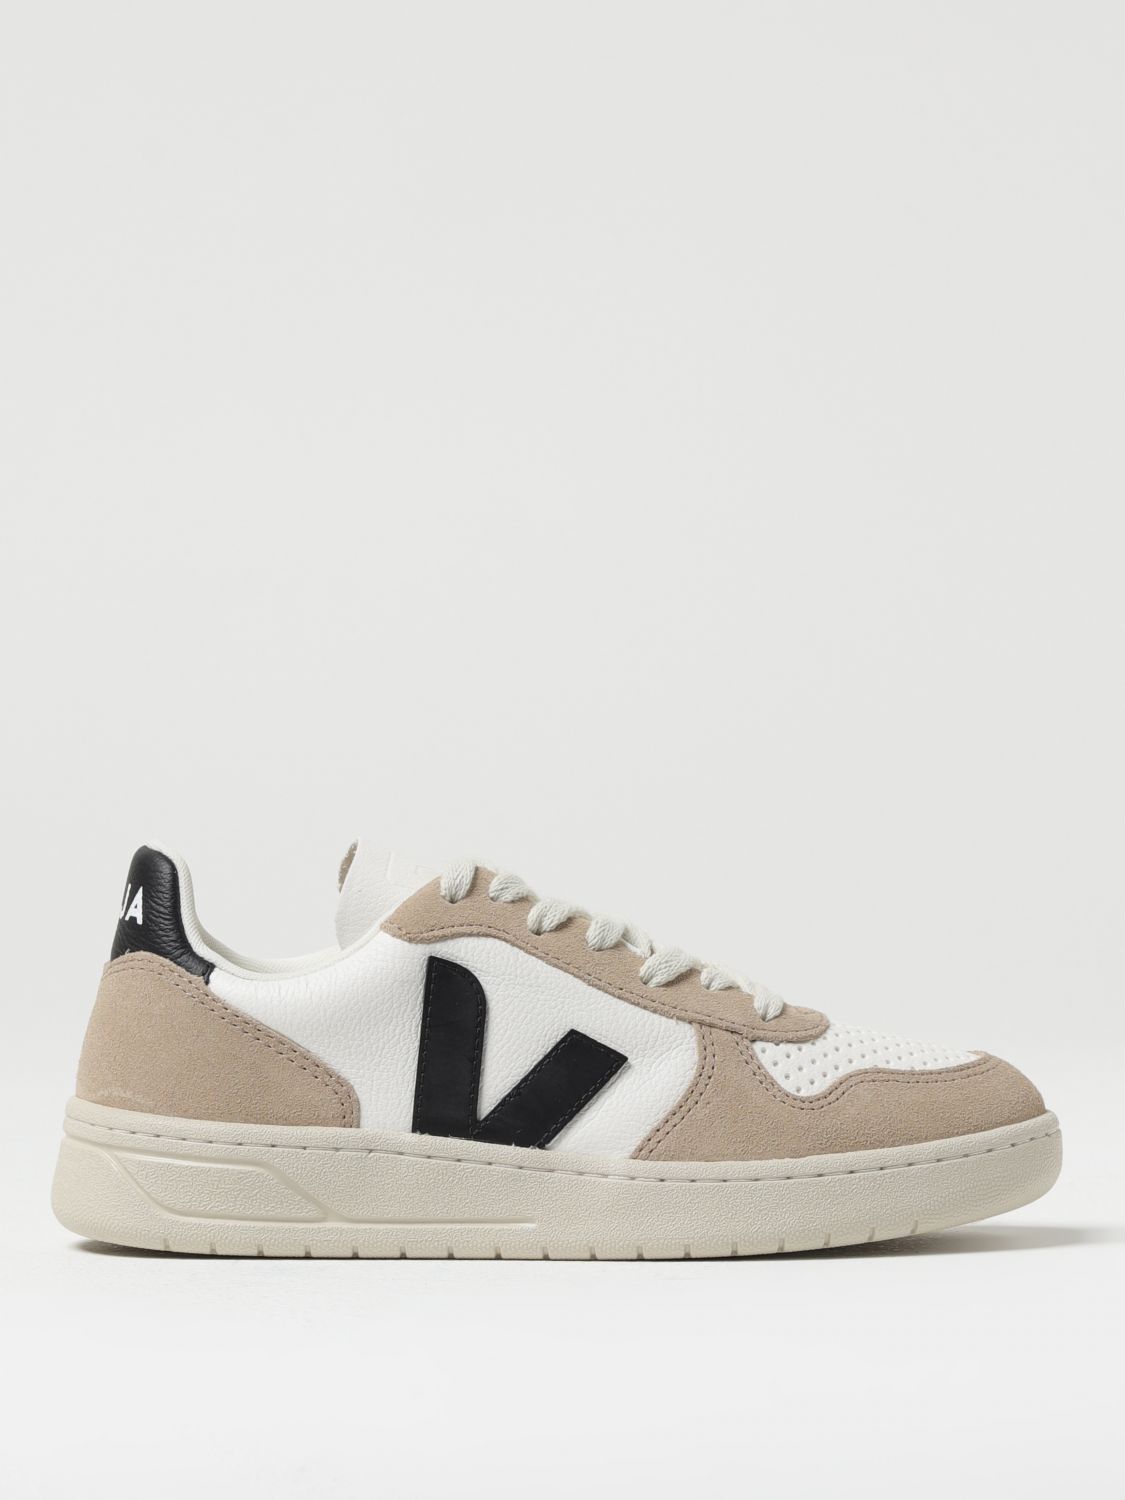 Veja Sneakers  Woman Color White